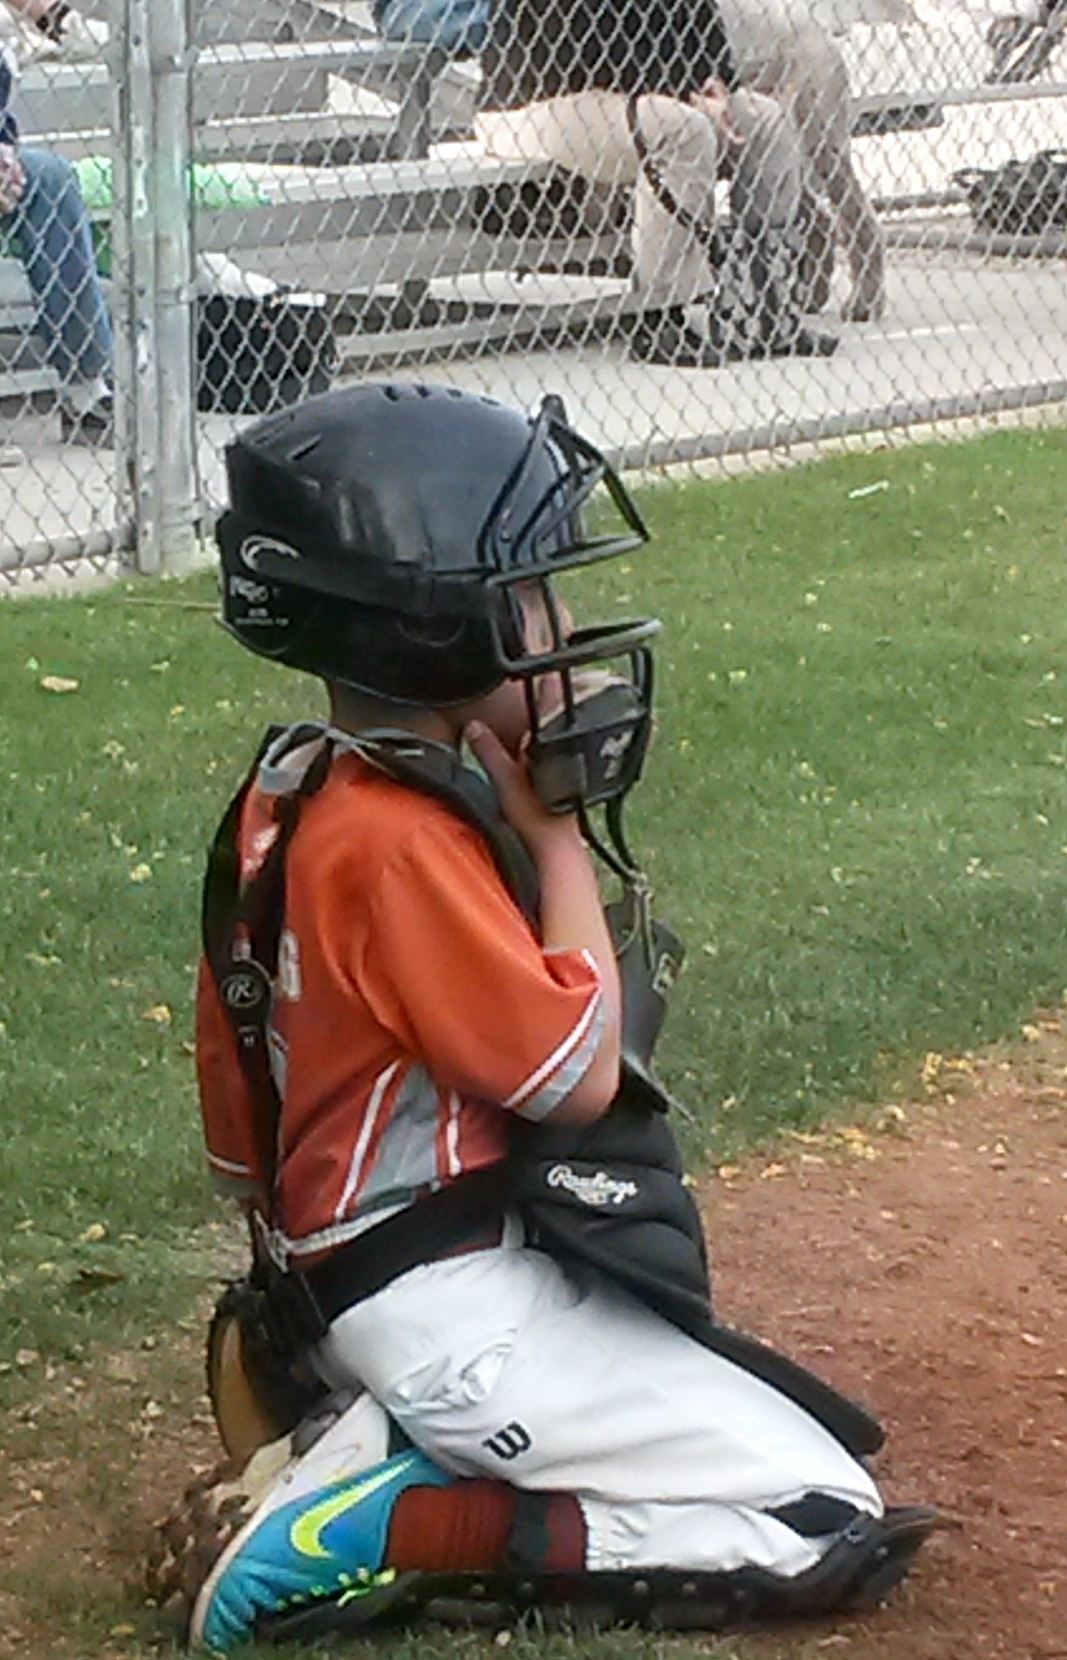 catcher injury prevention — Identifying and Preventing Arm